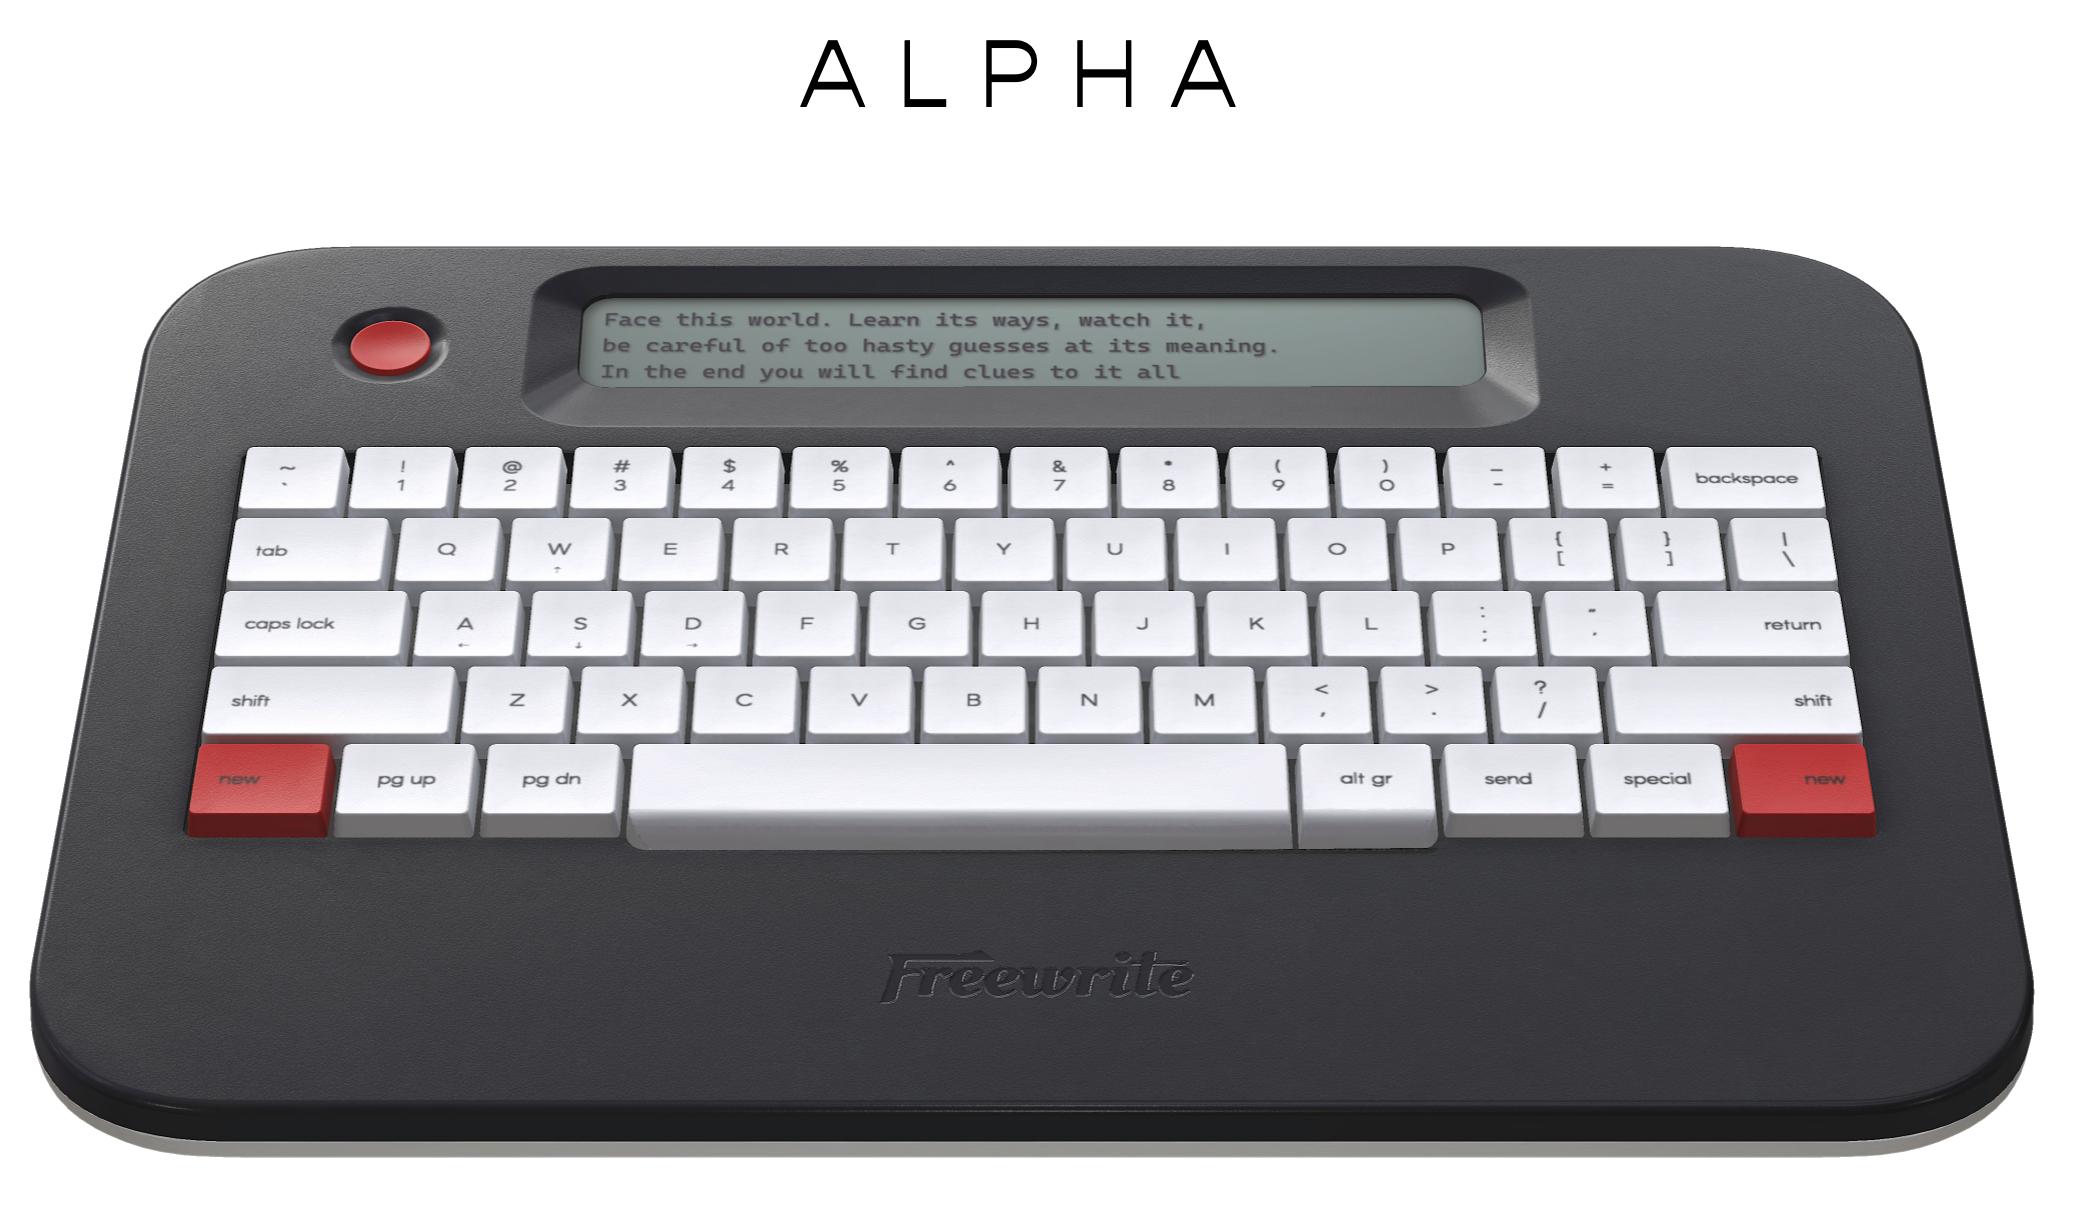 Freewright Alpha Typewriter is shipping in January